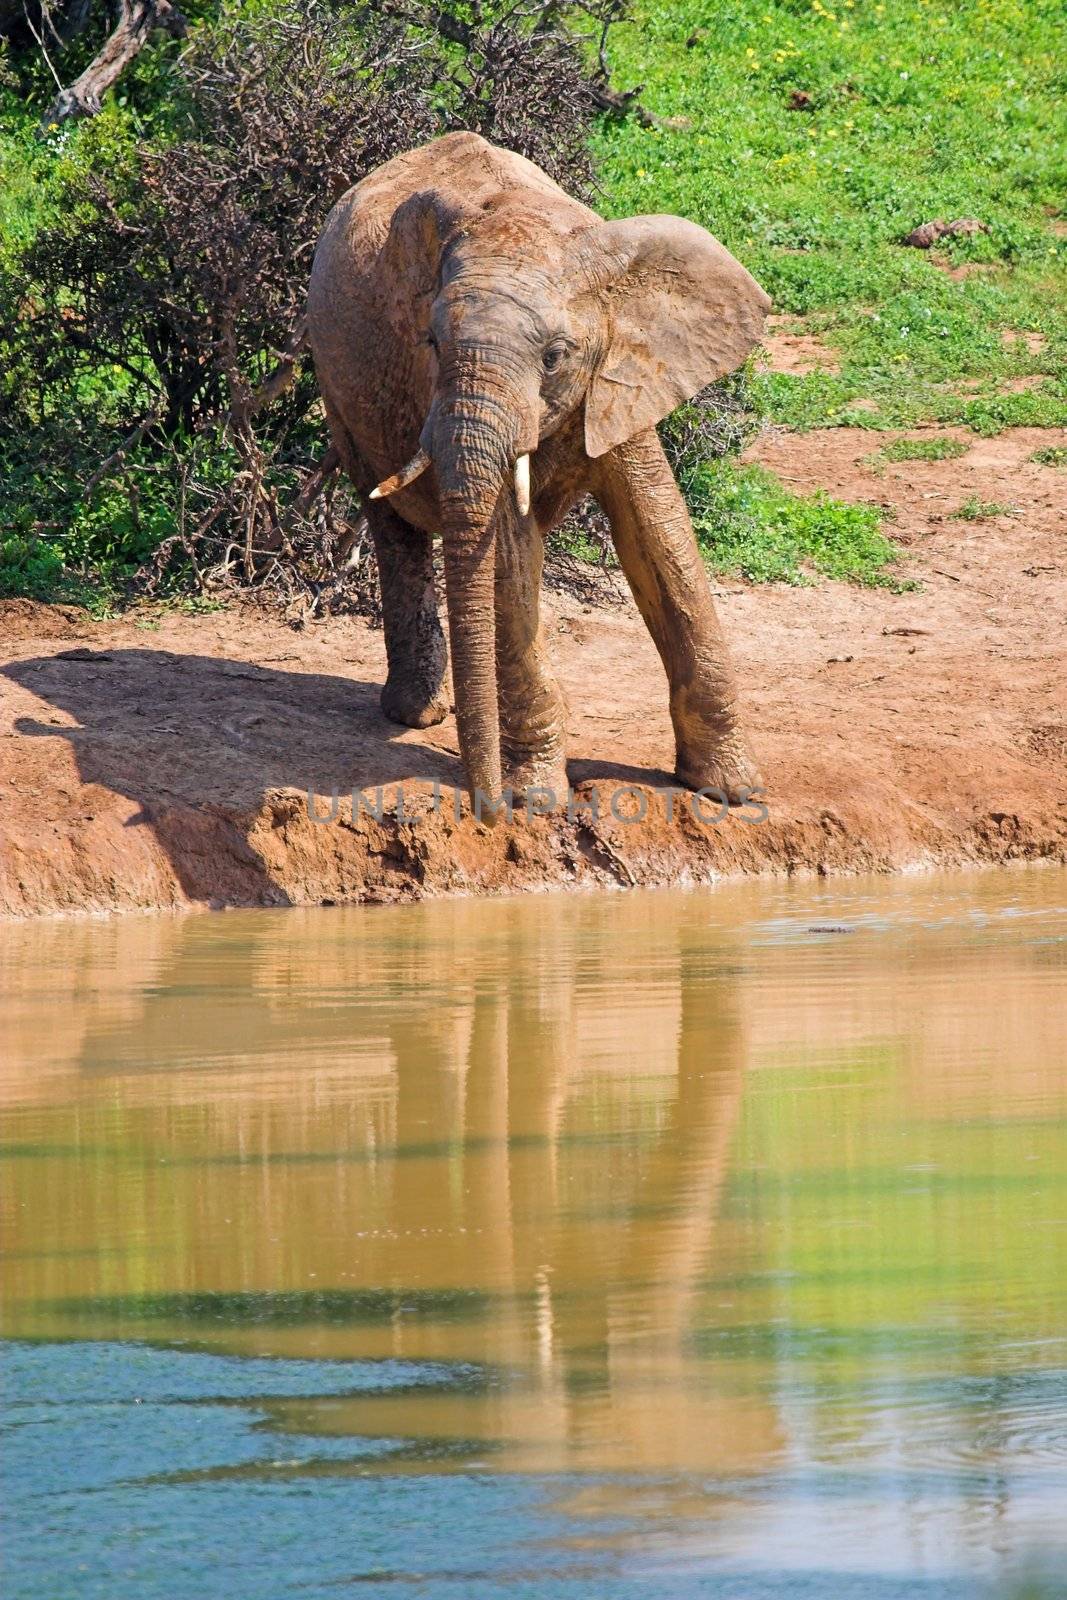 Muddy Bull Elephant drinking at the waterhole with reflection in the water